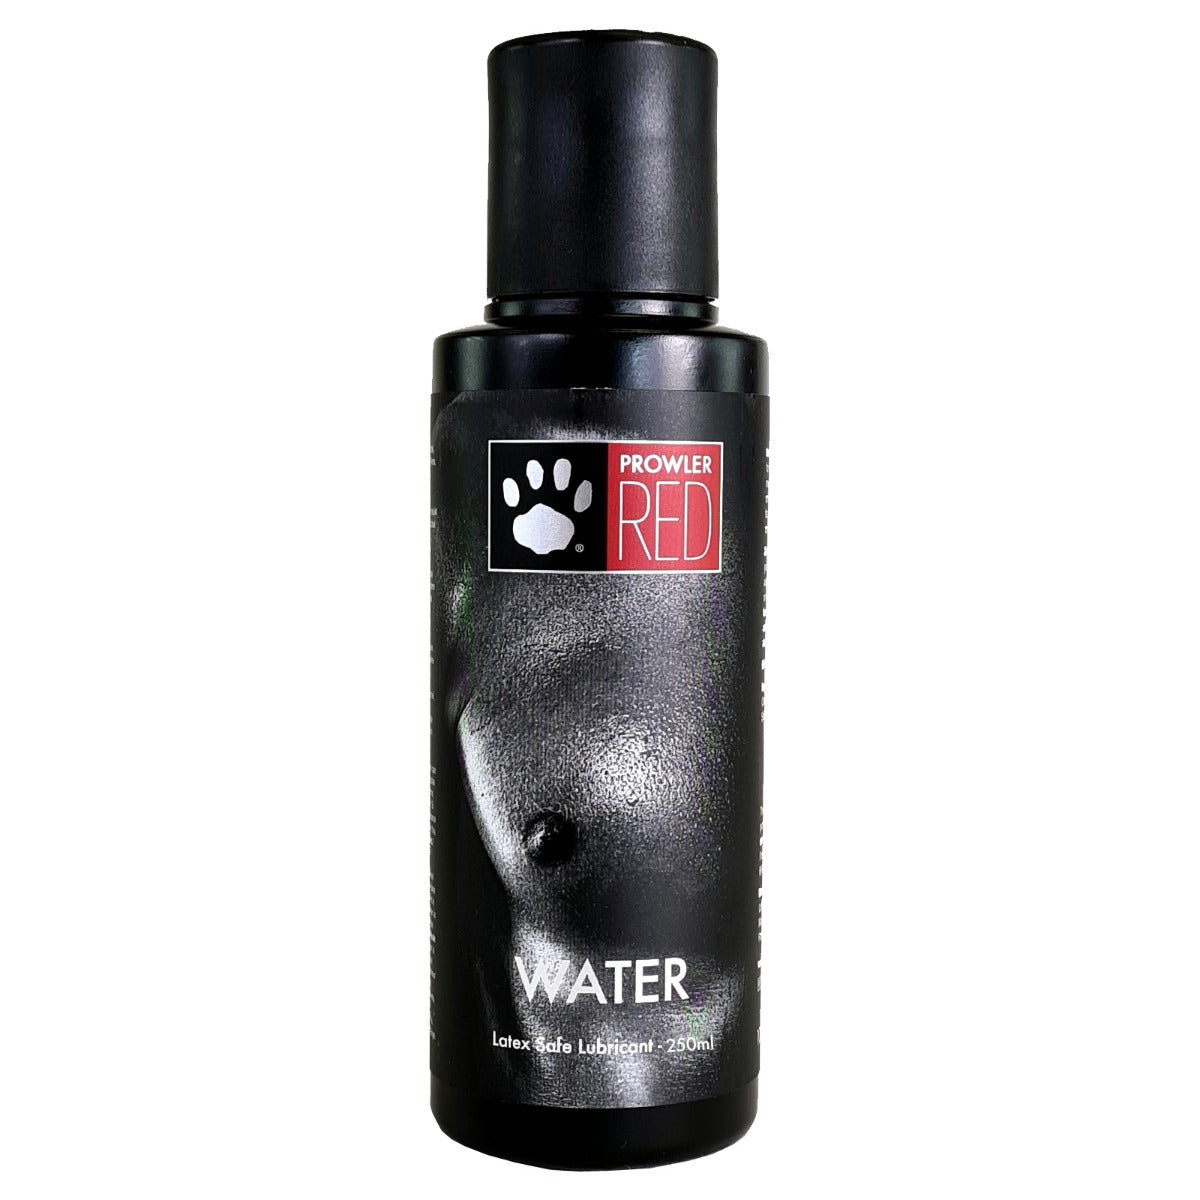 Prowler RED Water-based Lube (7069675716772)